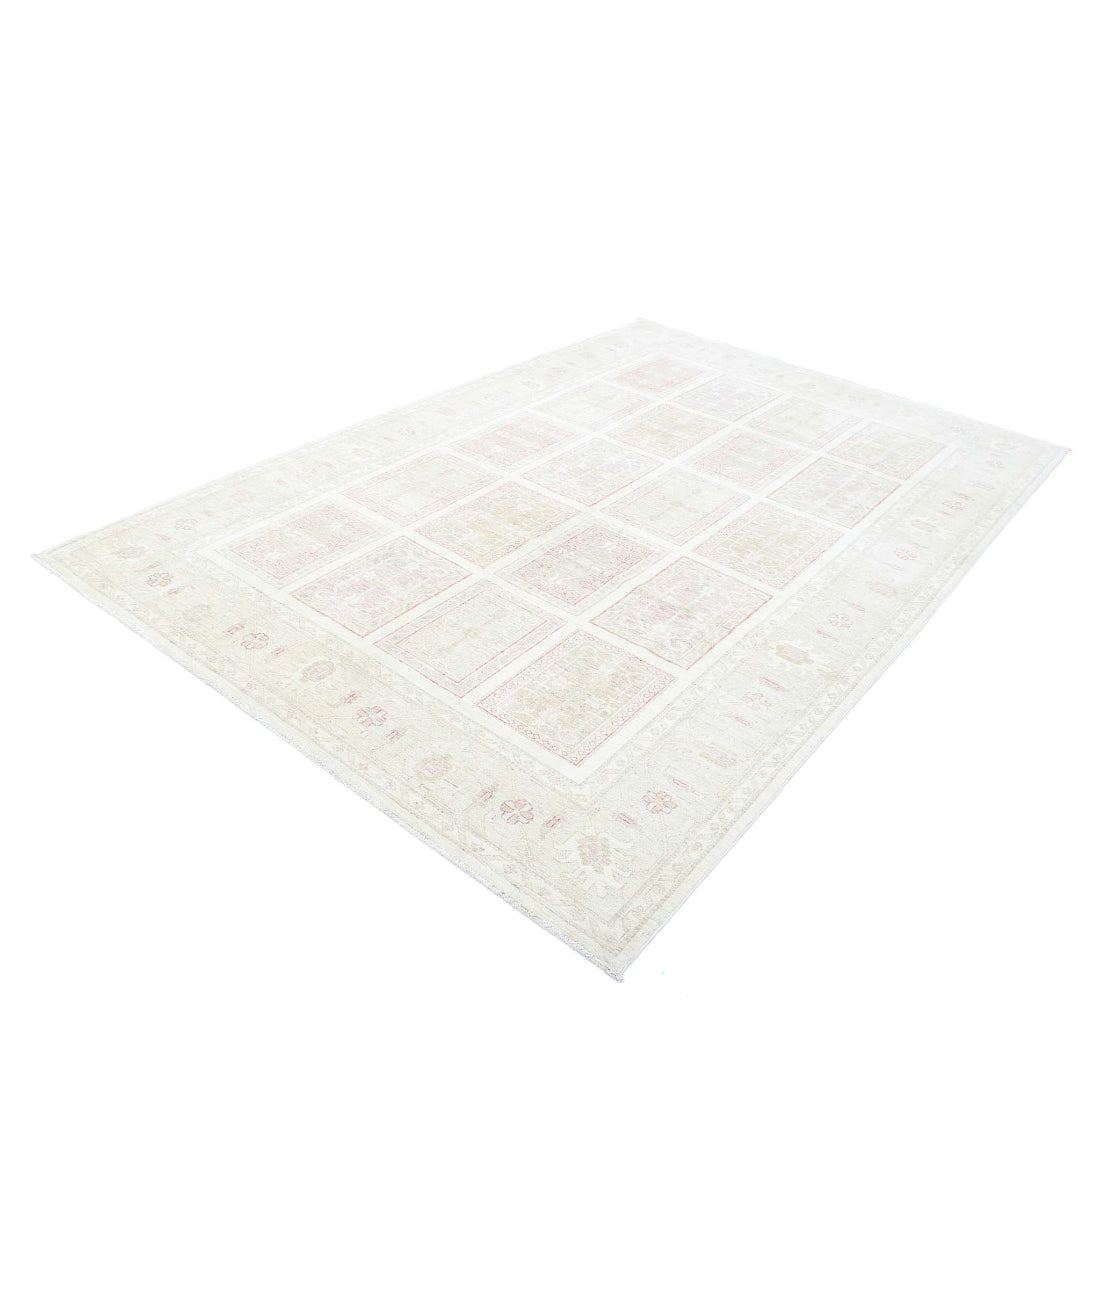 Hand Knotted Bakhtiari Wool Rug - 6'7'' x 9'8'' 6'7'' x 9'8'' (198 X 290) / Ivory / Taupe